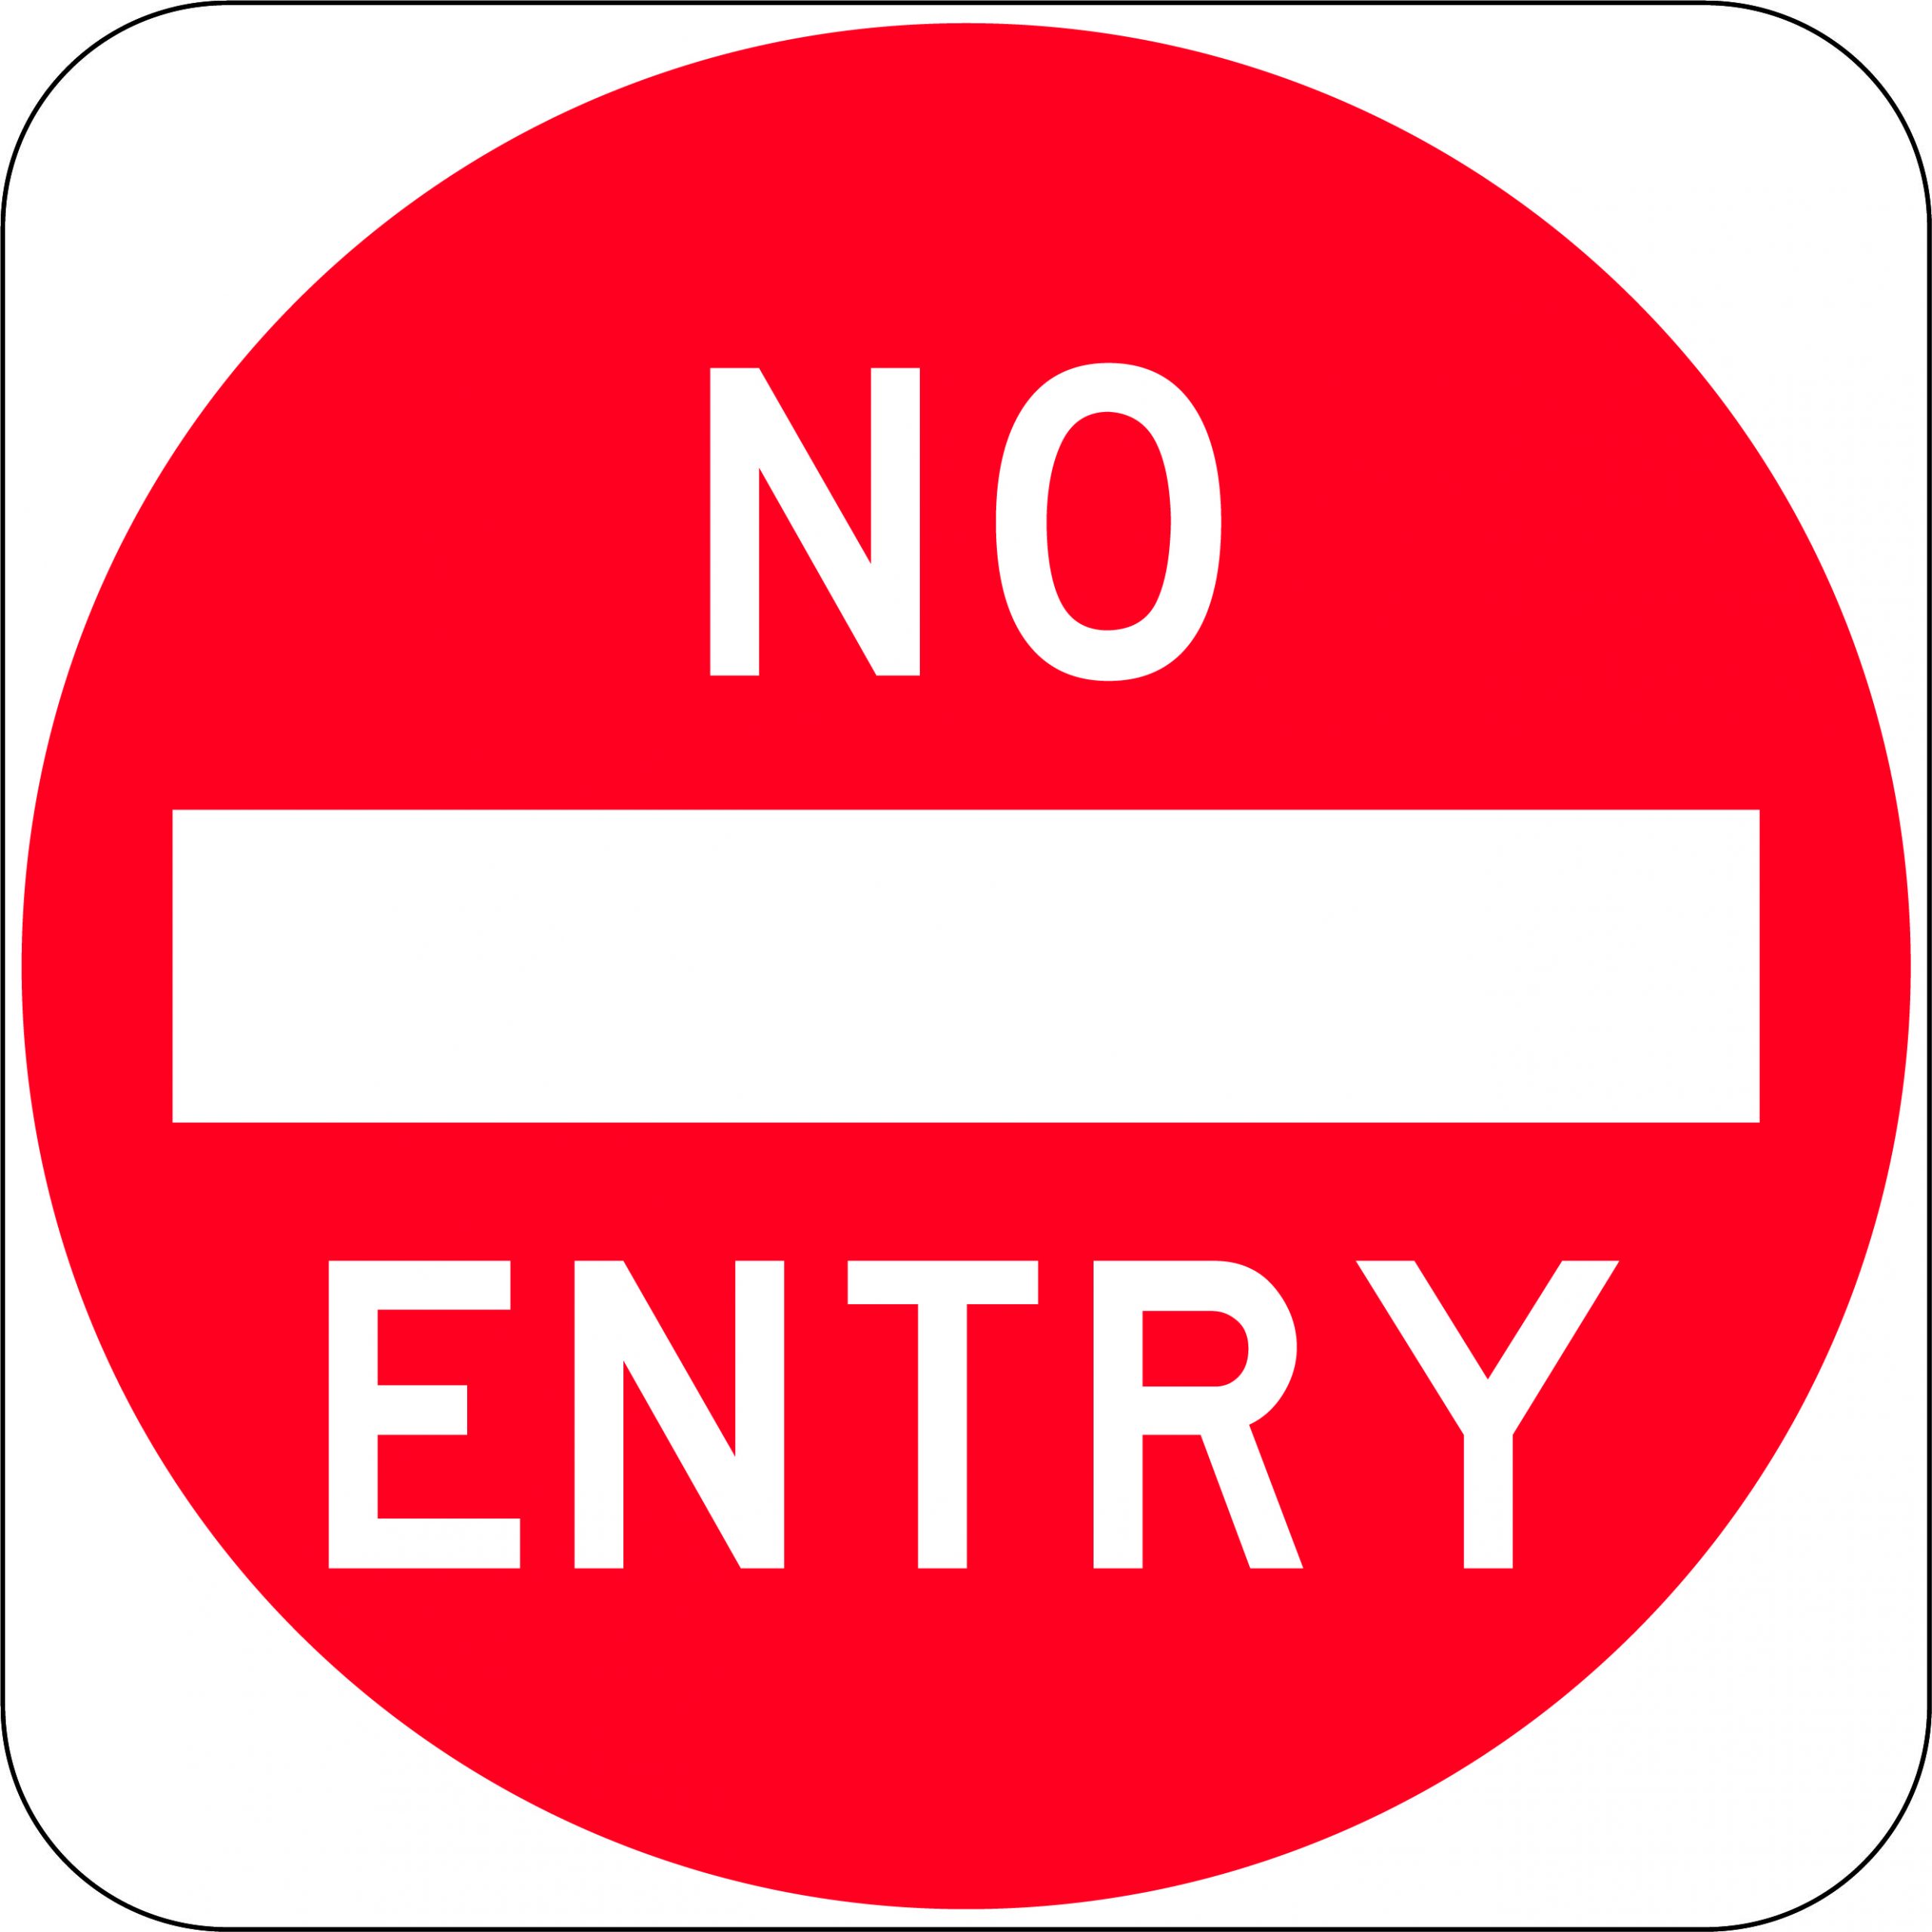 SIGN 450 X 750MM CLASS 1 ALUMINIUM NO ENTRY AND SYMBOL NSW STANDARD